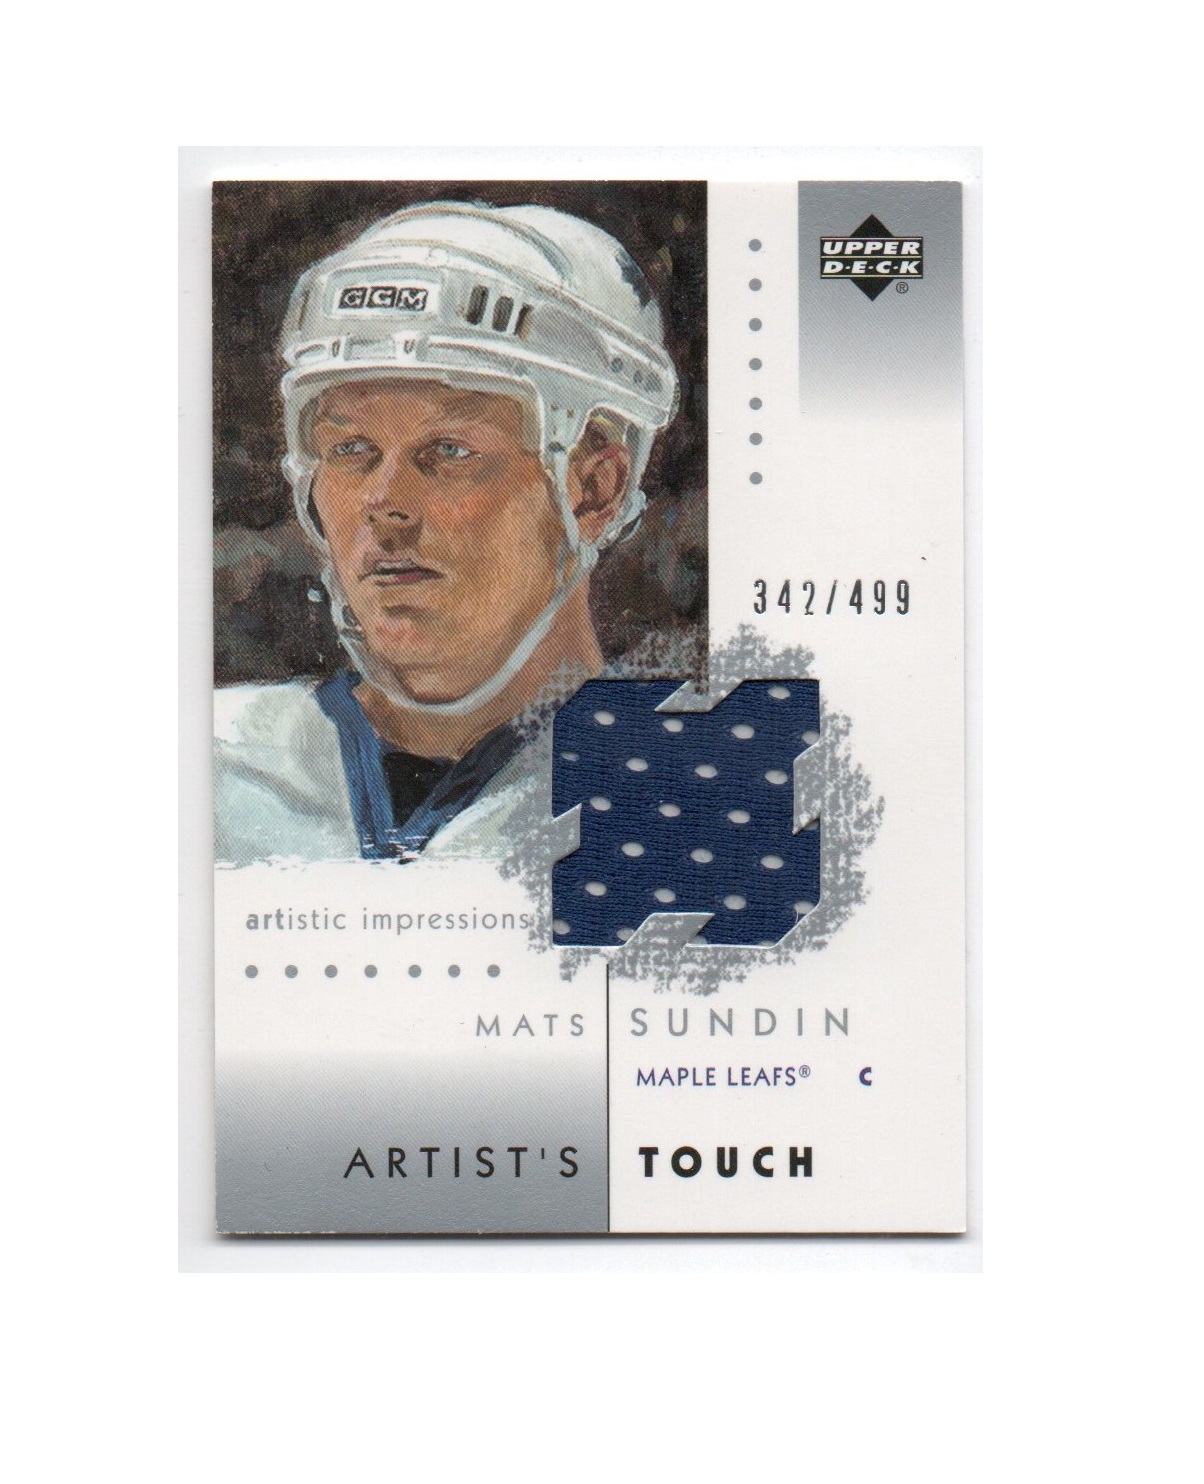 2002-03 UD Artistic Impressions Artist's Touch Jerseys #ATMS Mats Sundin (50-X216-MAPLE LEAFS)